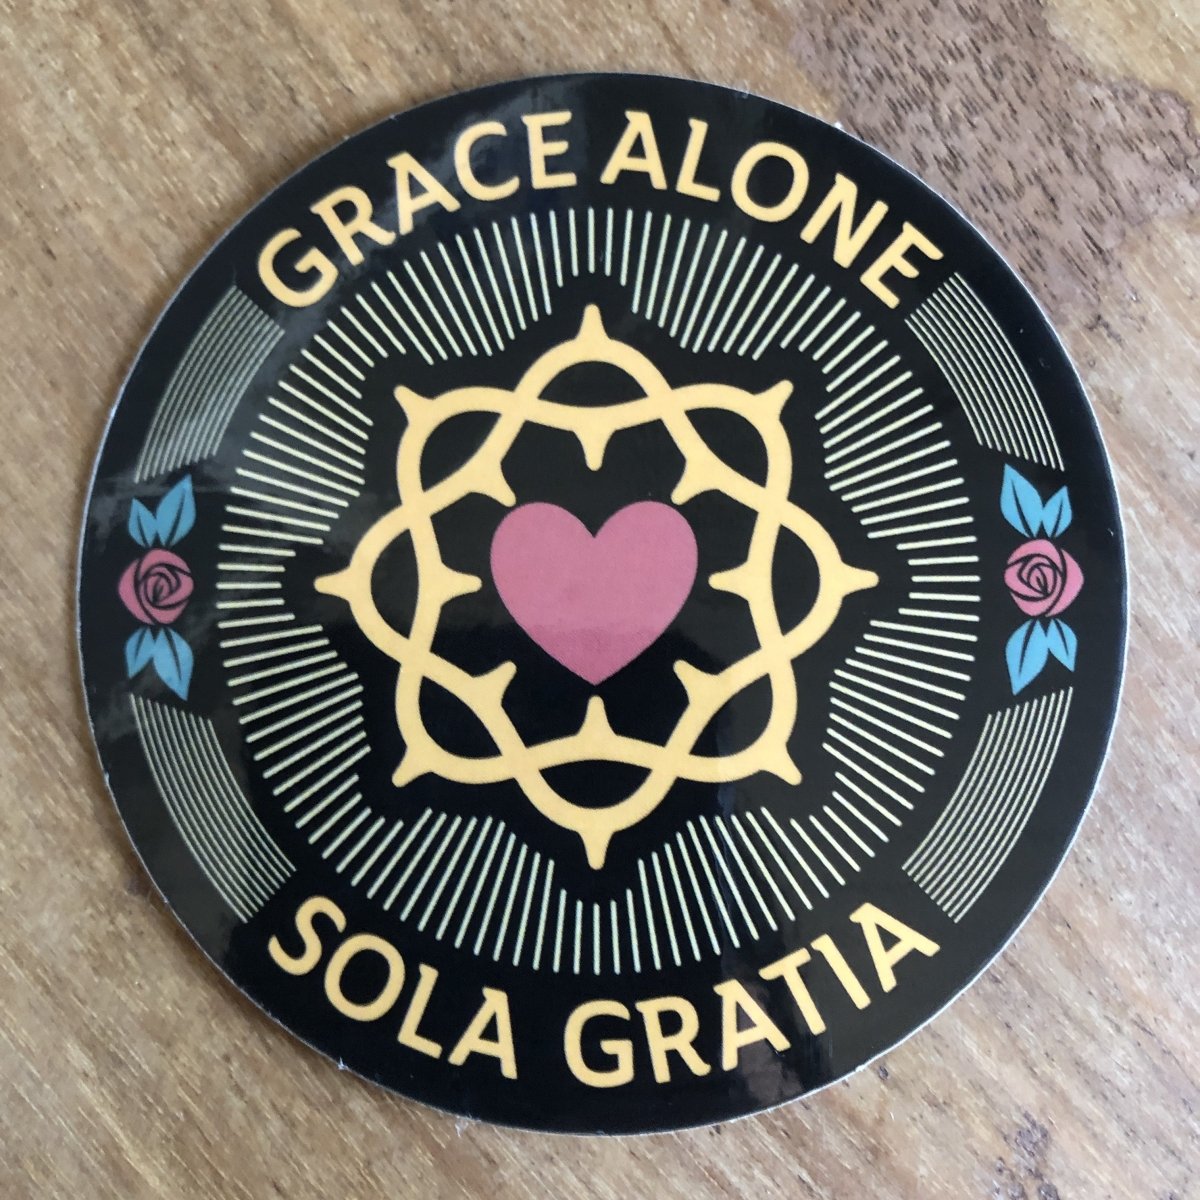 Decal - Sola Gratia Seal - Decal - The Reformed Sage - #reformed# - #reformed_gifts# - #christian_gifts#